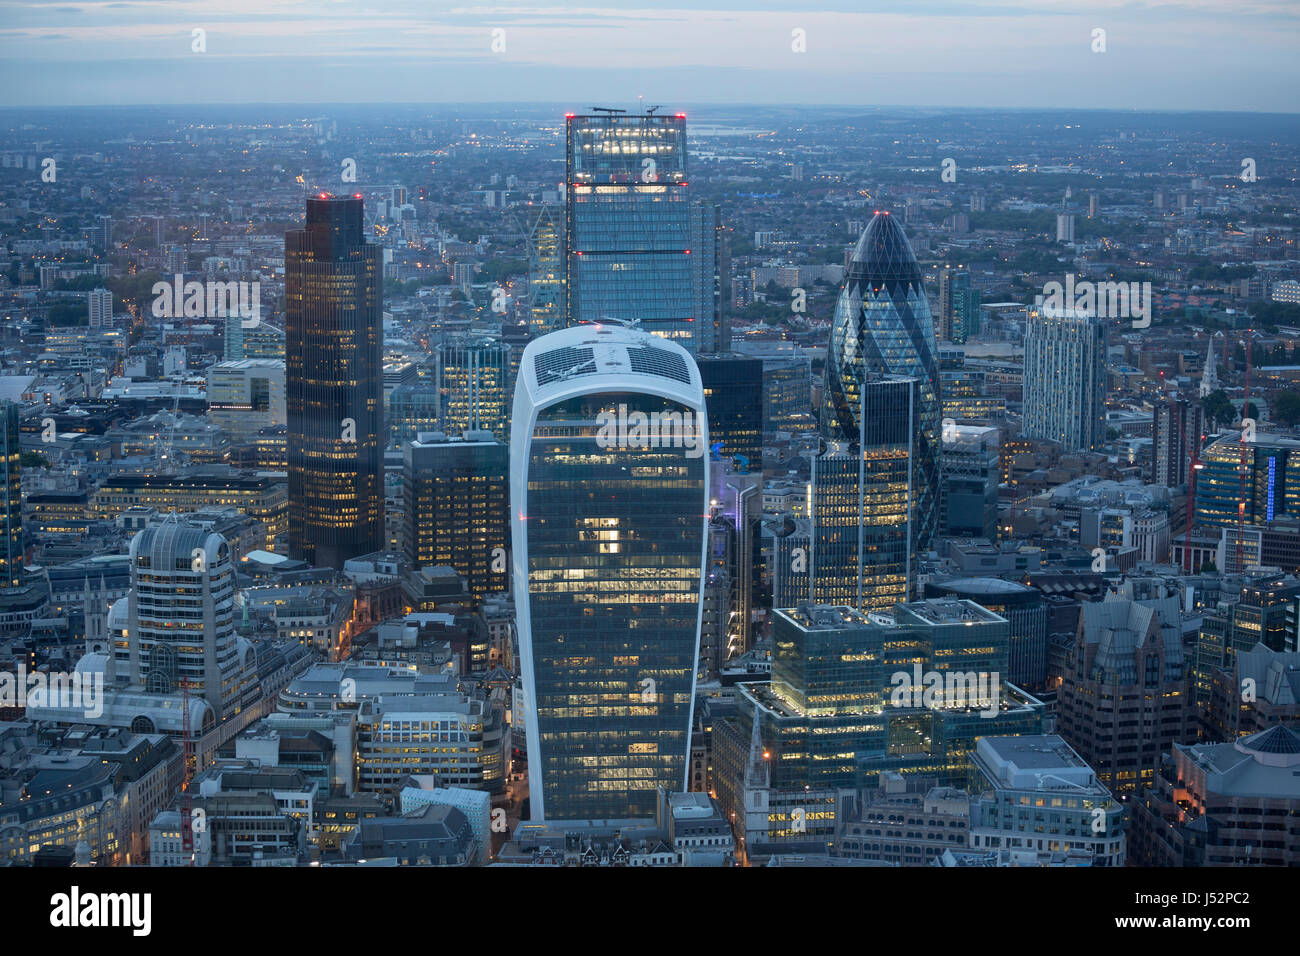 Aerial view of the city of London at dusk. With the financial district in the forground. Stock Photo